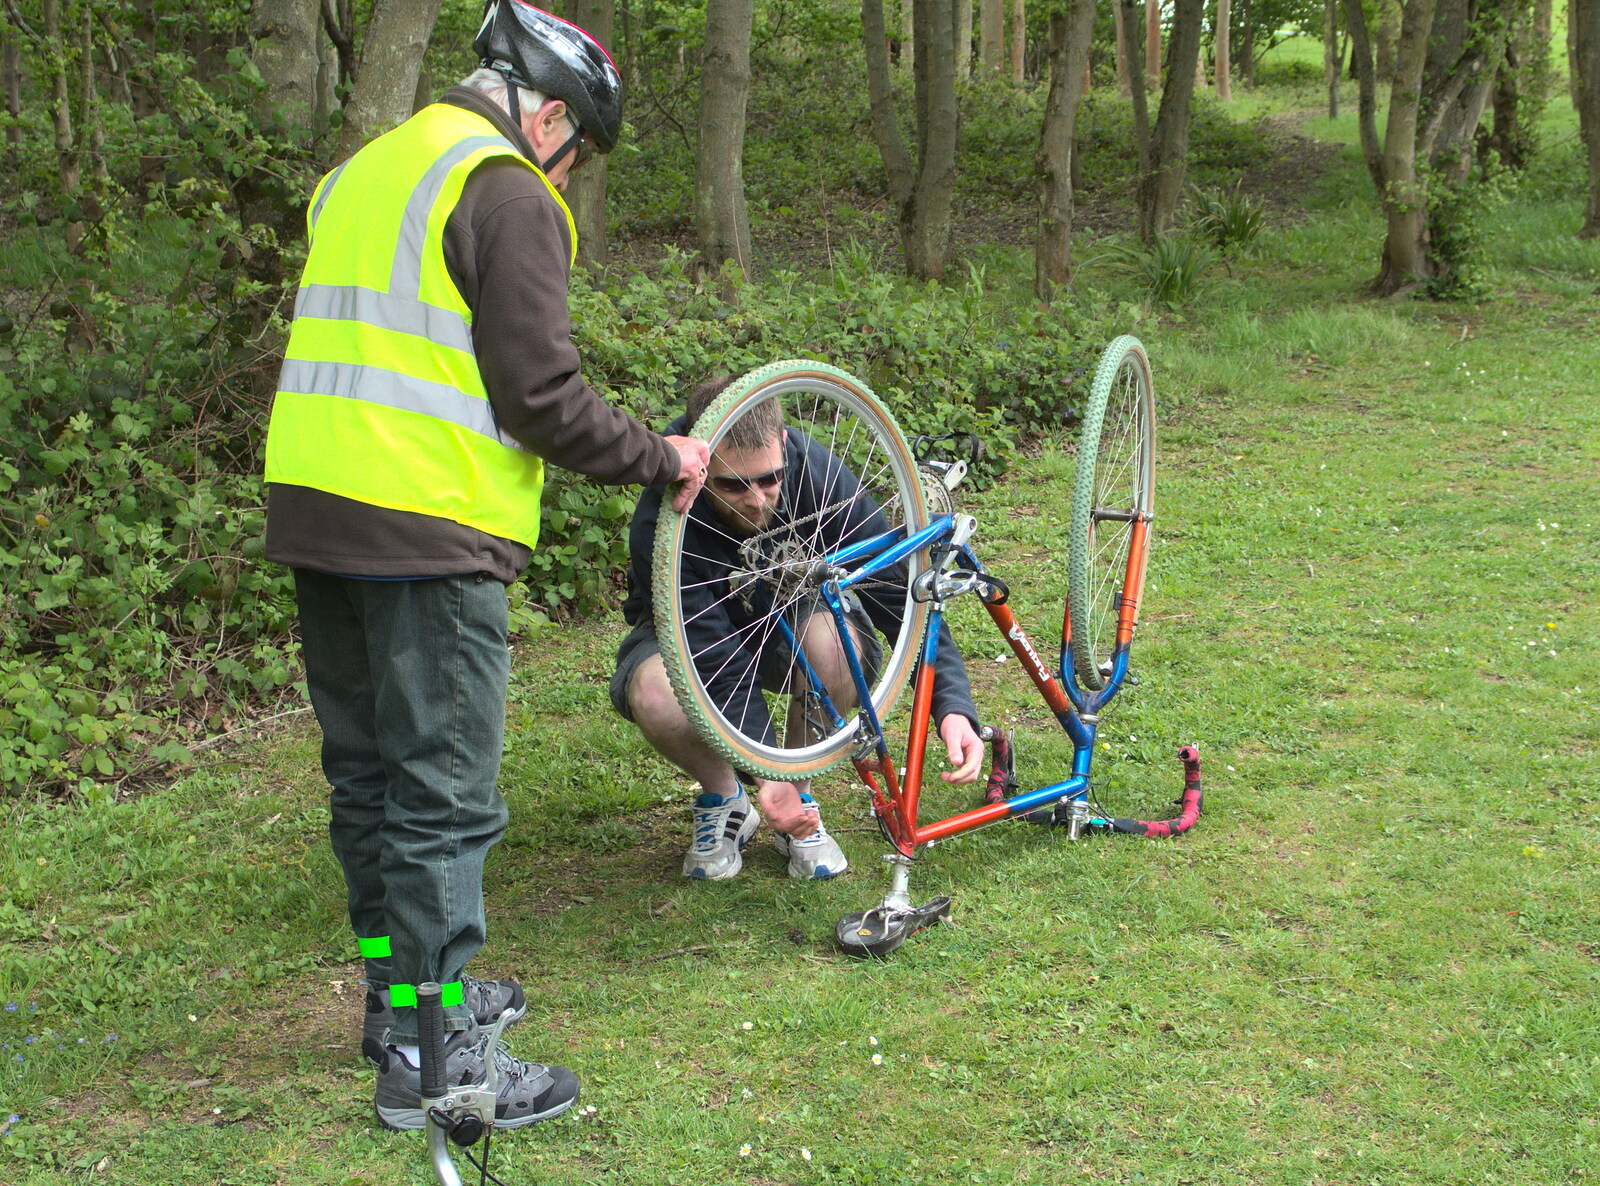 The Boy Phil has some mechanical issues from The BSCC Weekend Away, Lyddington, Rutland - 9th May 2015